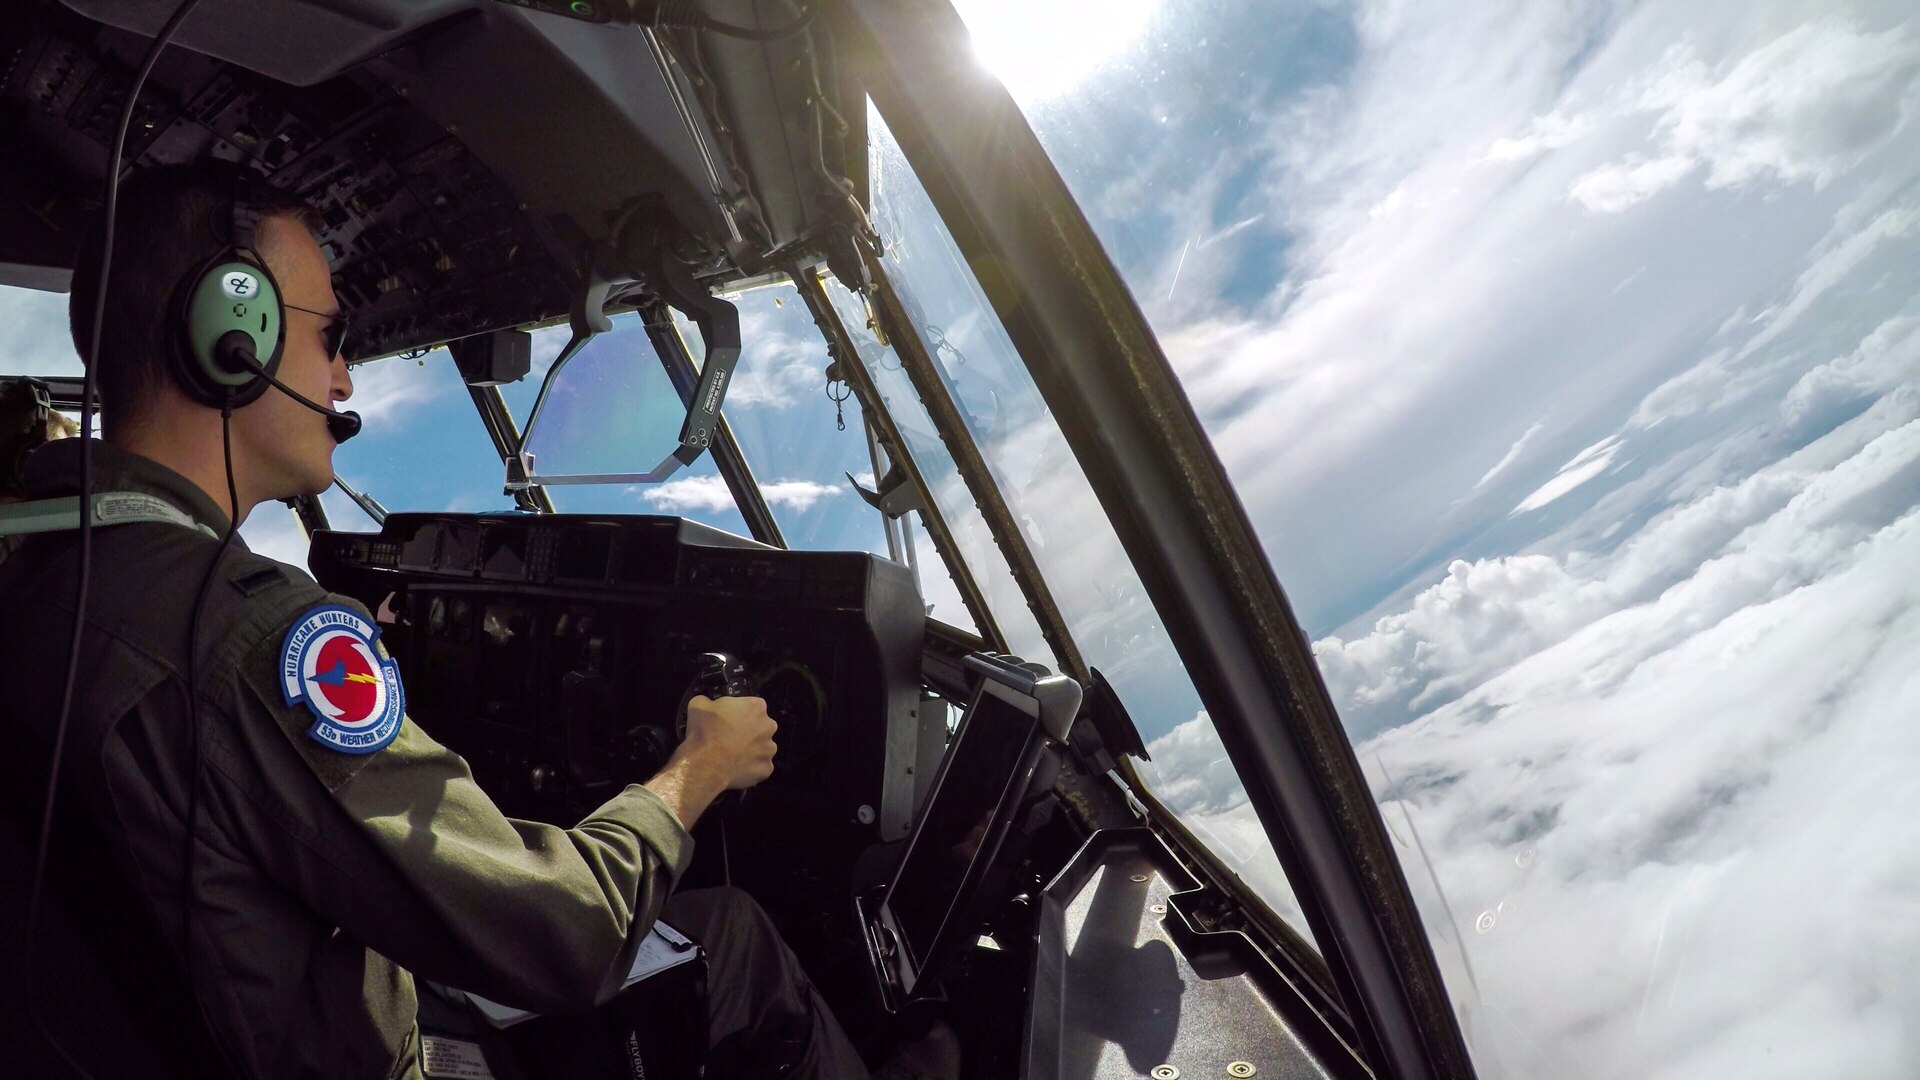 1st Lt. Ryan Smithies, 53rd Weather Reconnaissance Squadron pilot, flies a WC-130J Super Hercules in the eye of Hurricane Dorian Sep. 4,2019 off the coast of Savannah, Georgia. During his mission Dorian was a category 2 hurricane and intensified into a category 3. (U.S. Air Force photo by 1st Lt. Ryan Smithies)